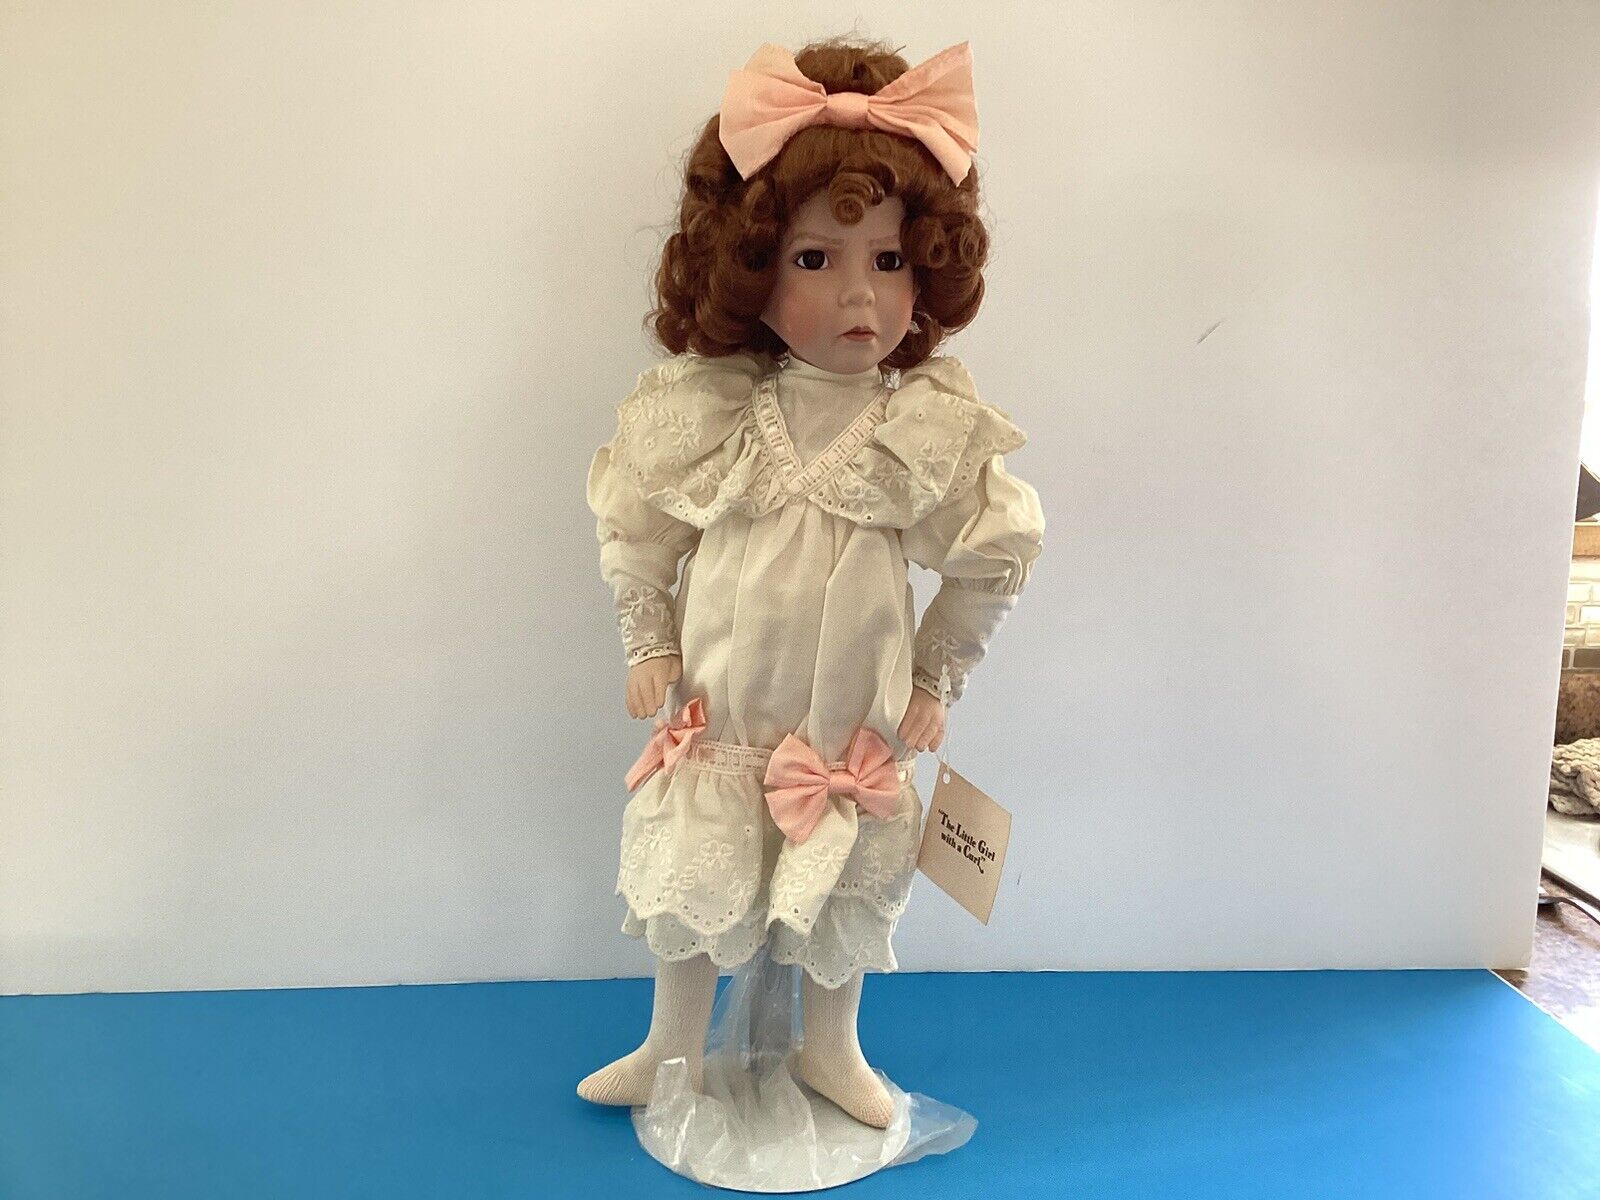 Dianna Effner Doll Mother Goose Collection “The Little Girl with a Curl”